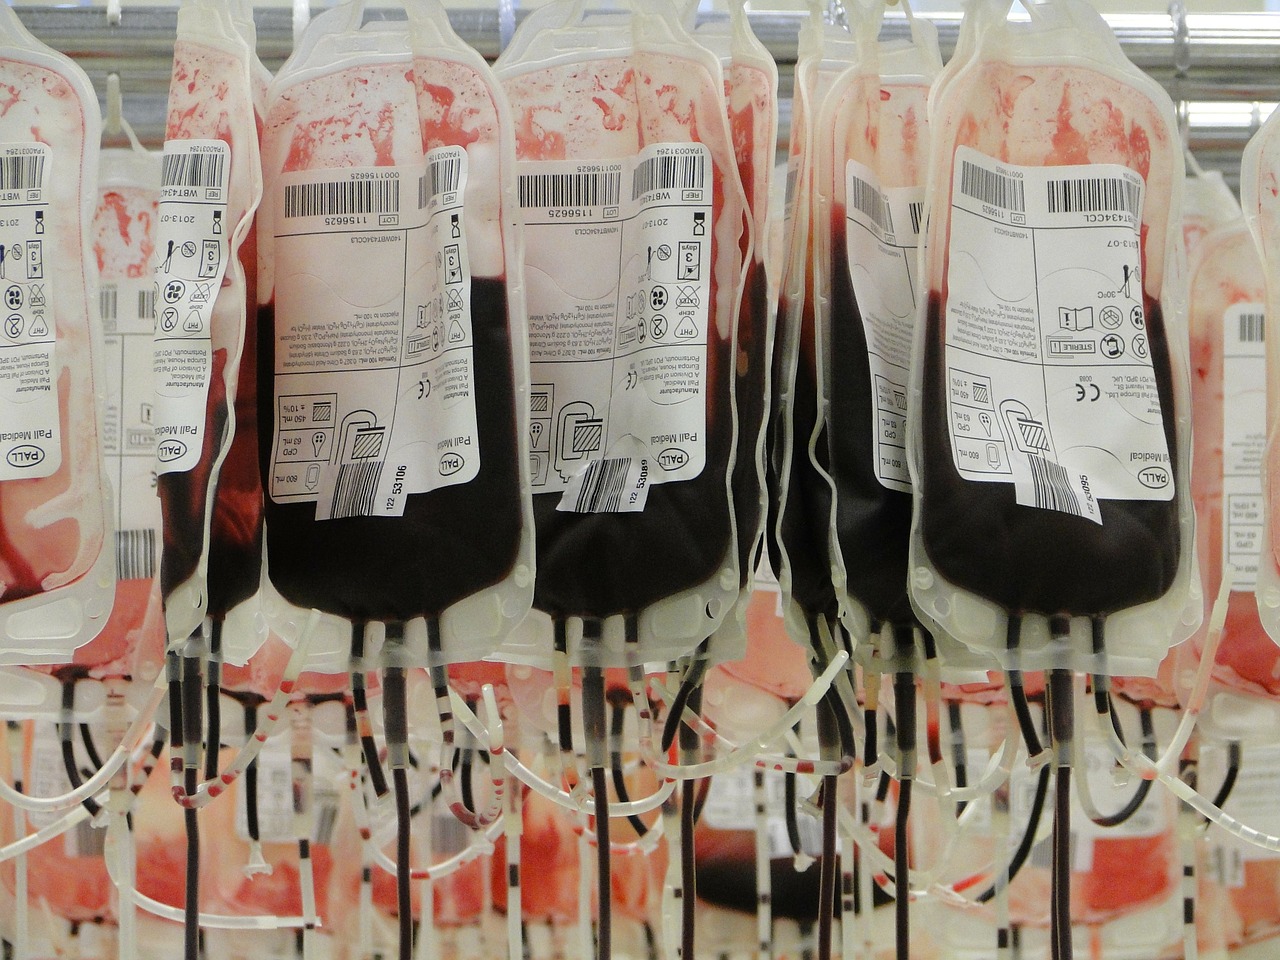 Blood donation bags